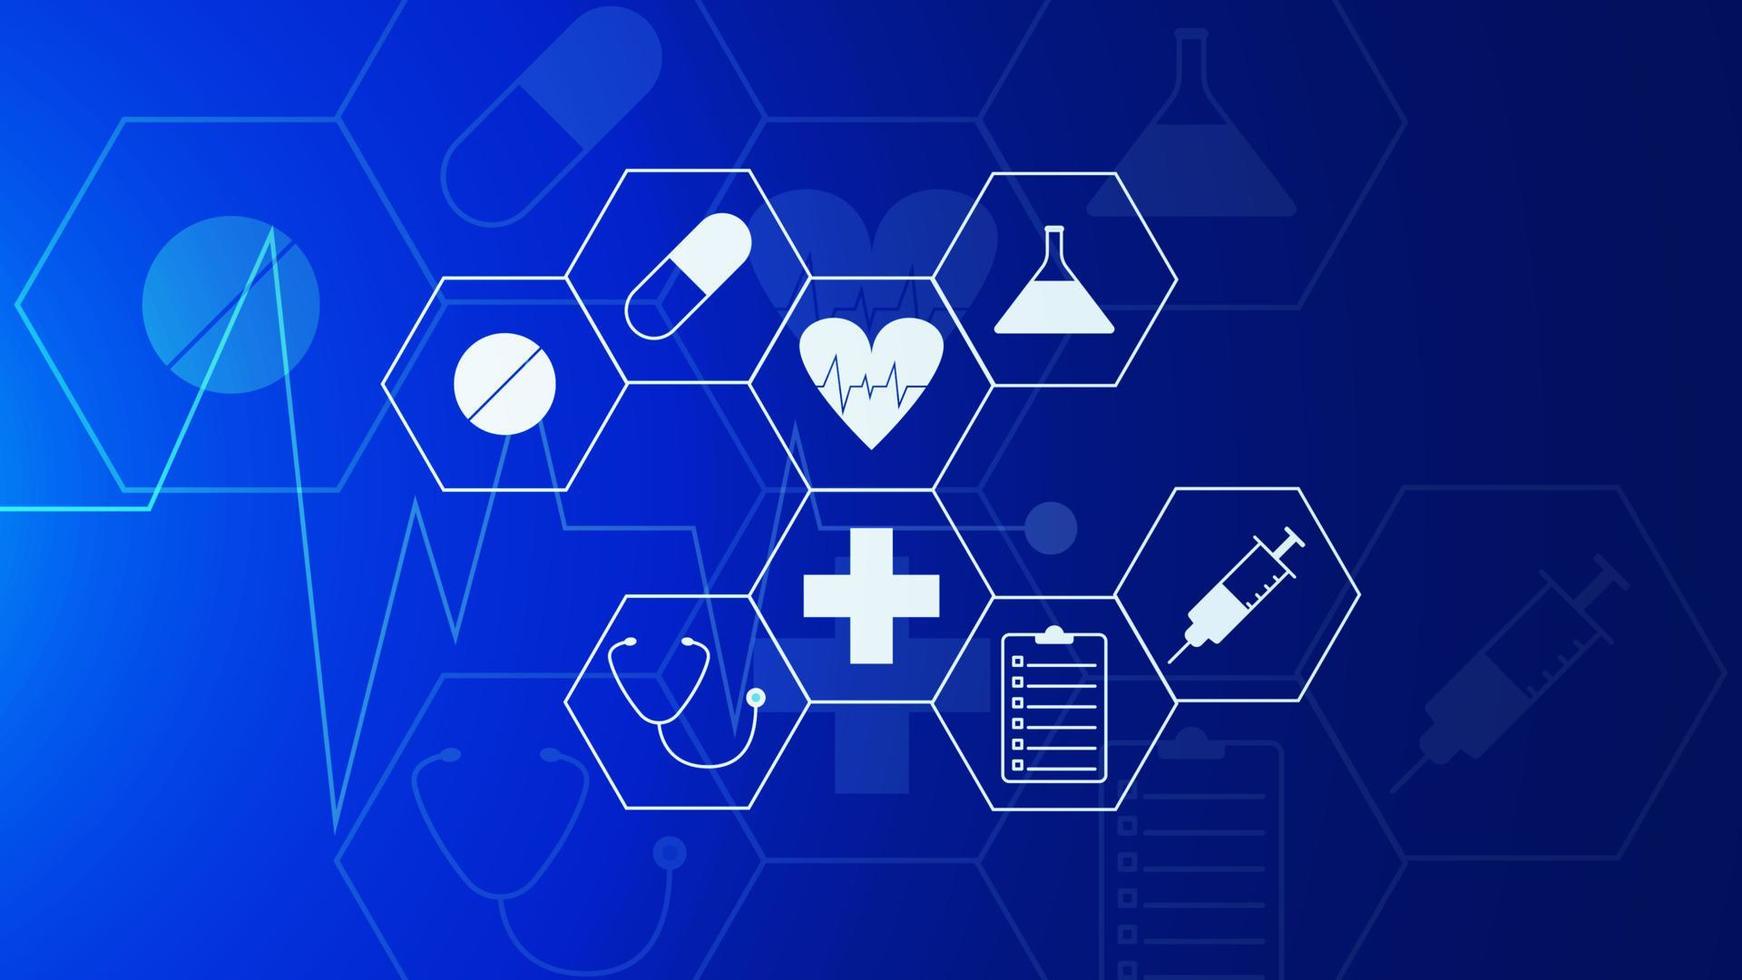 Healthcare and technology concept with icons. Minimal background for pharmaceutical industry, health care business, medicine, medical research and science. Vector illustration.